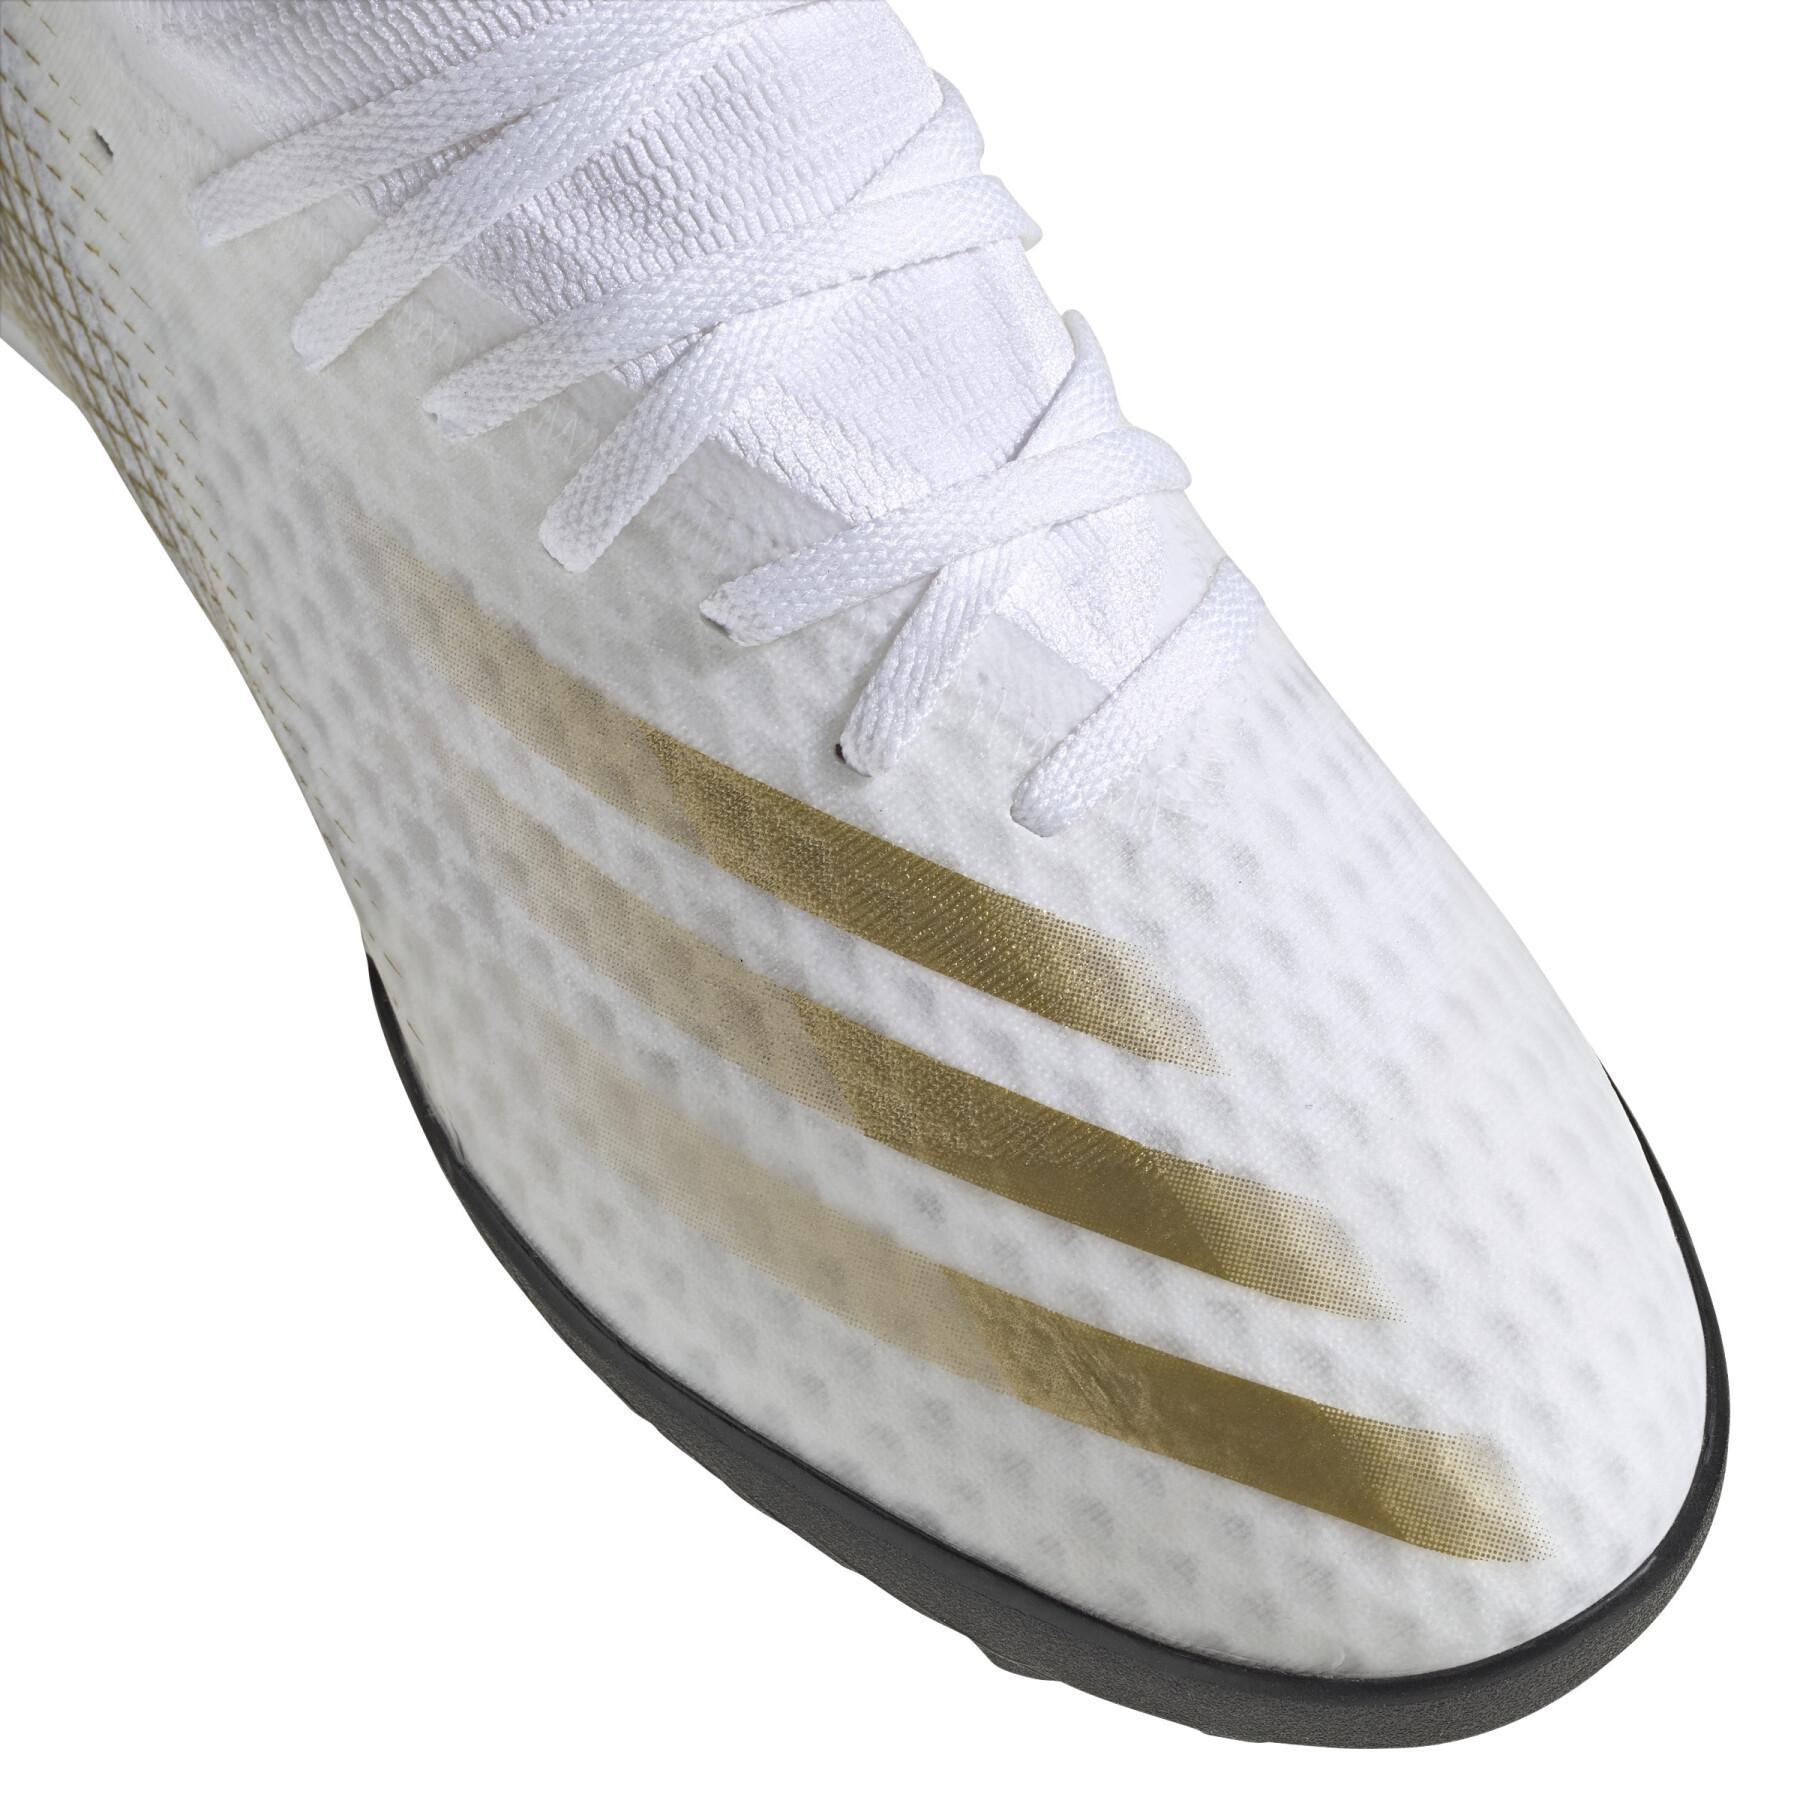 Chaussures de football adidas X Ghosted.3 TF